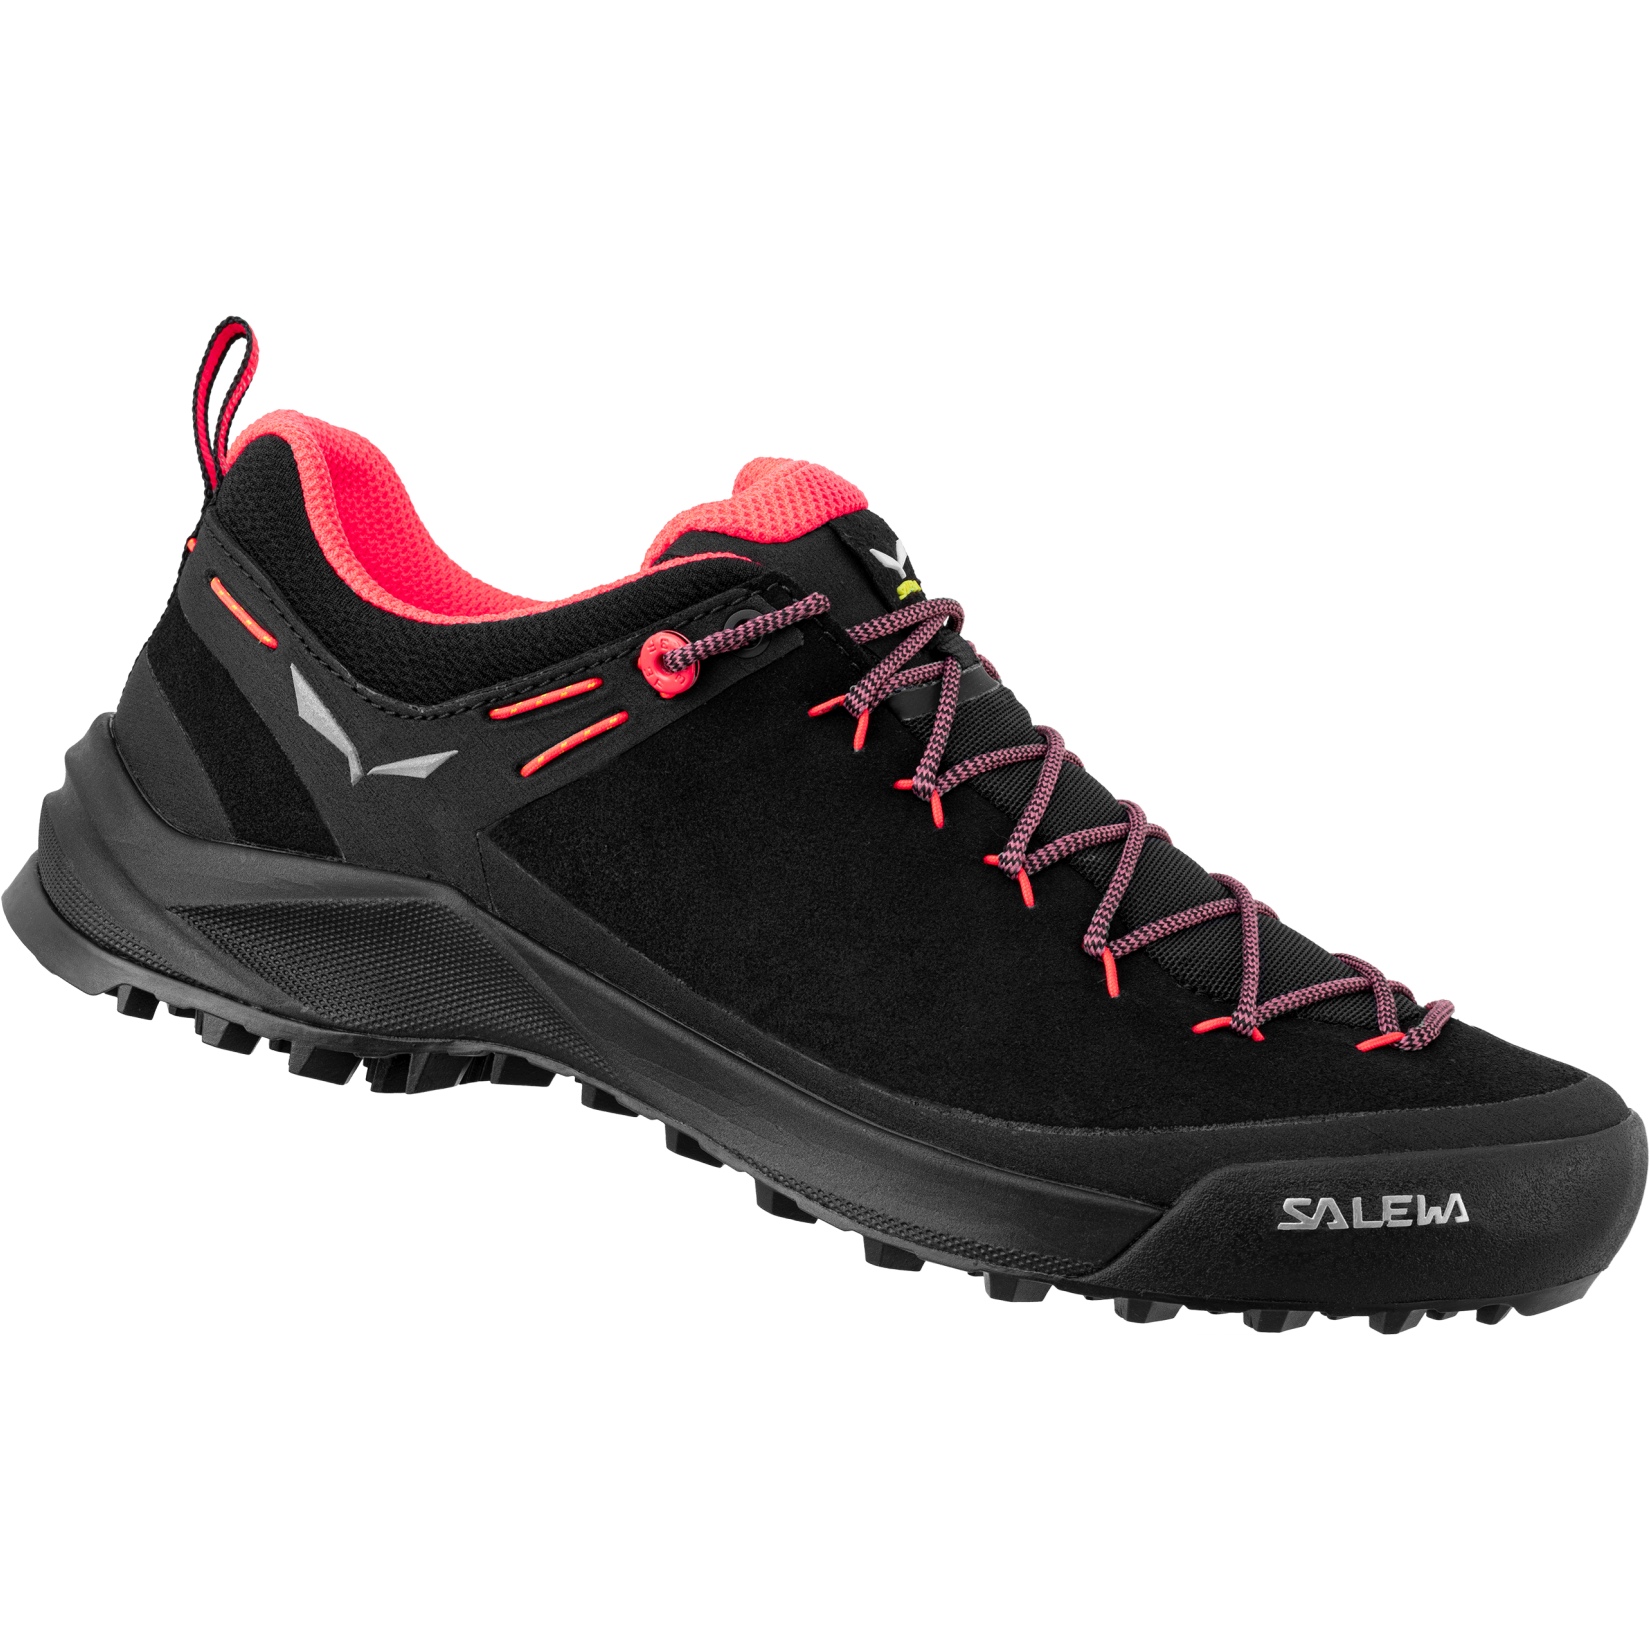 Image of Salewa Wildfire Leather Approach Shoes Women - black/fluo coral 0936